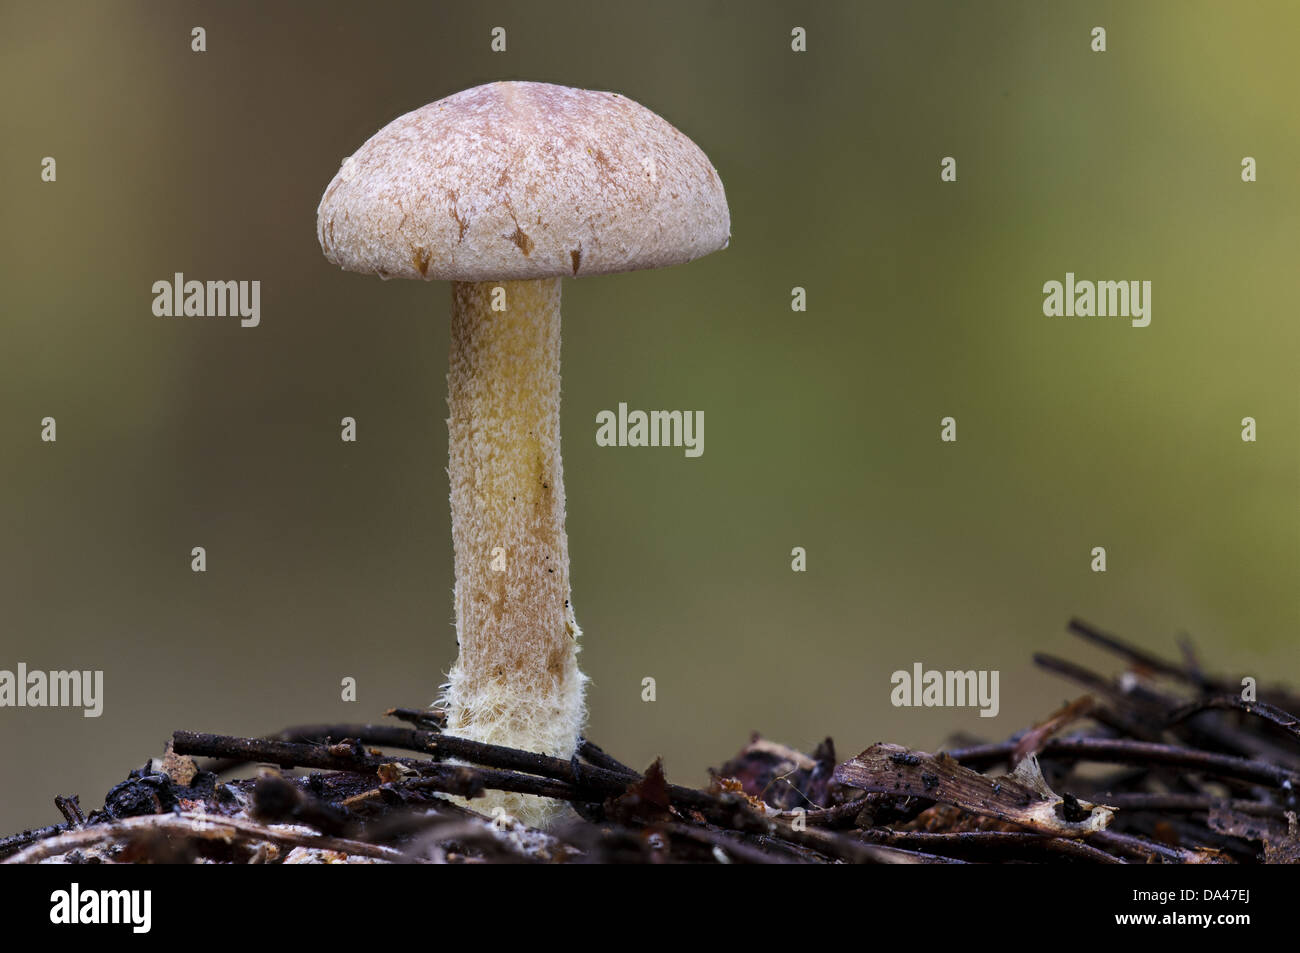 Wood Woolly-foot (Gymnopus peronatus) fruiting body showing hairy base to stipe from which it gets name Clumber Park Stock Photo